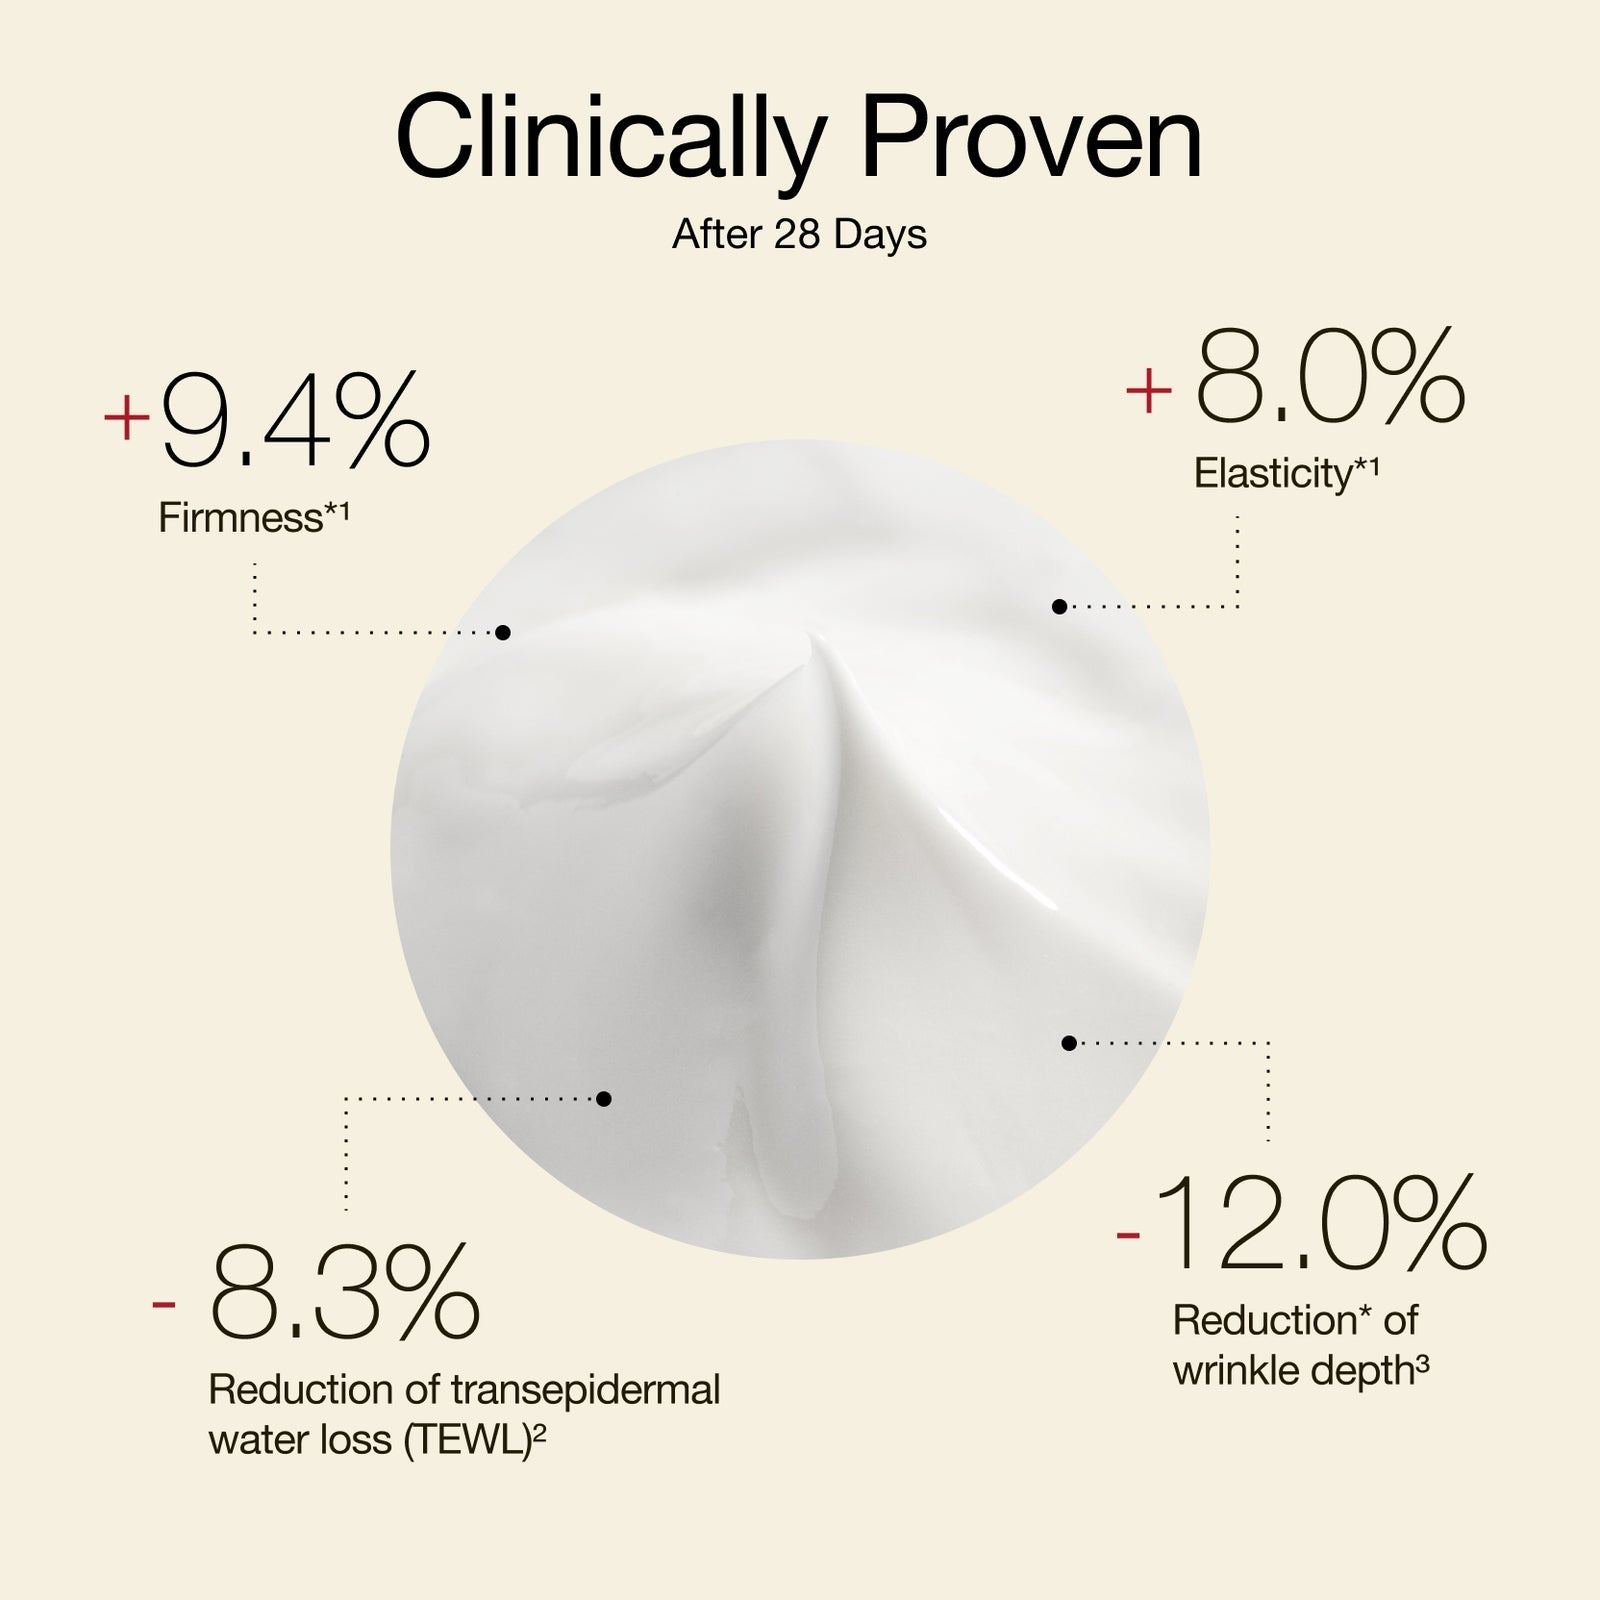 Cellcosmet Ultra Vital Light Clinically Proven product image infographic